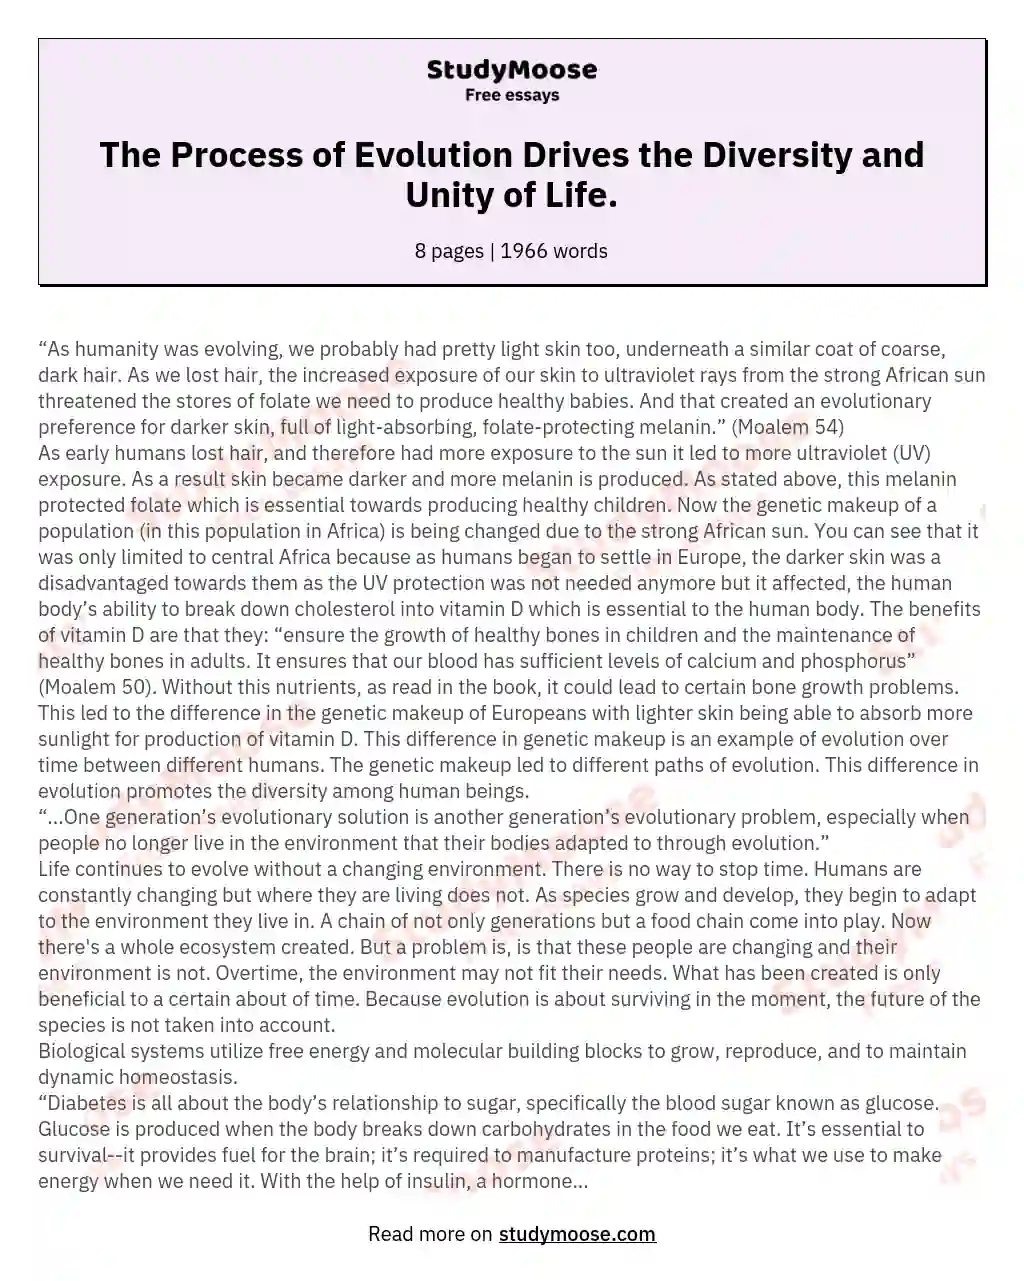 The Process of Evolution Drives the Diversity and Unity of Life. essay